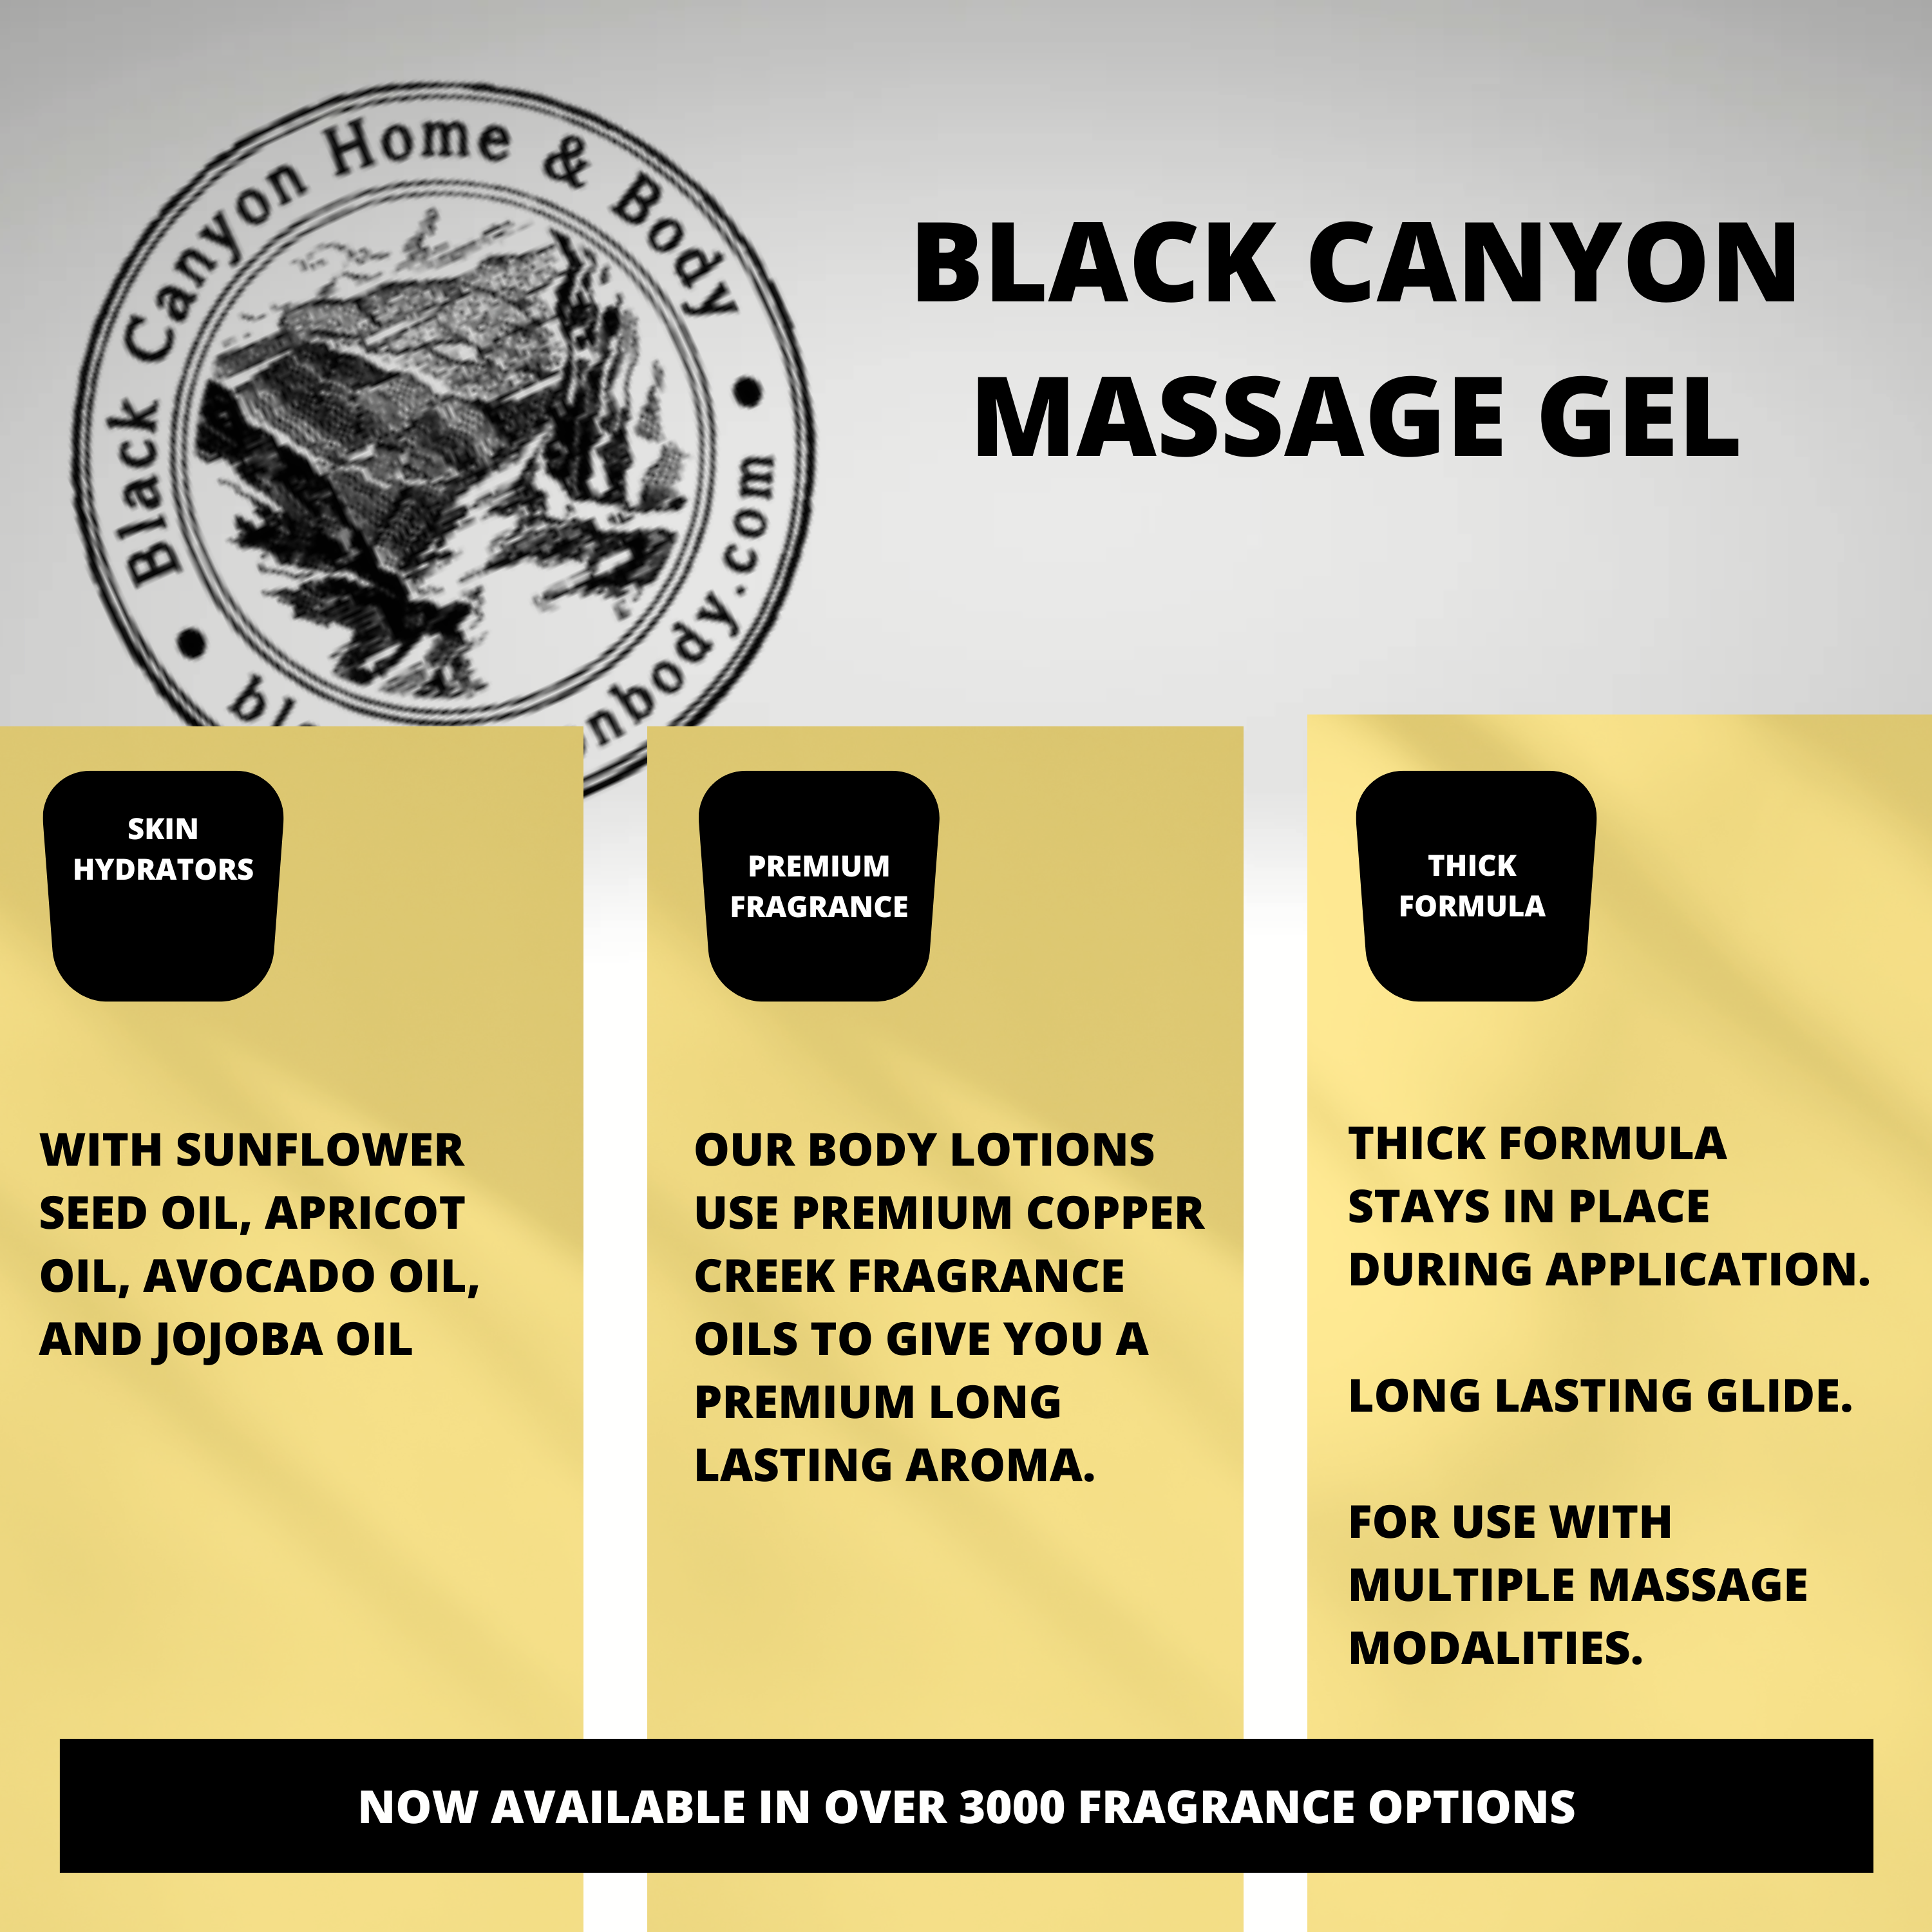 Black Canyon Sweet Pea & Ivy Scented Massage Gel